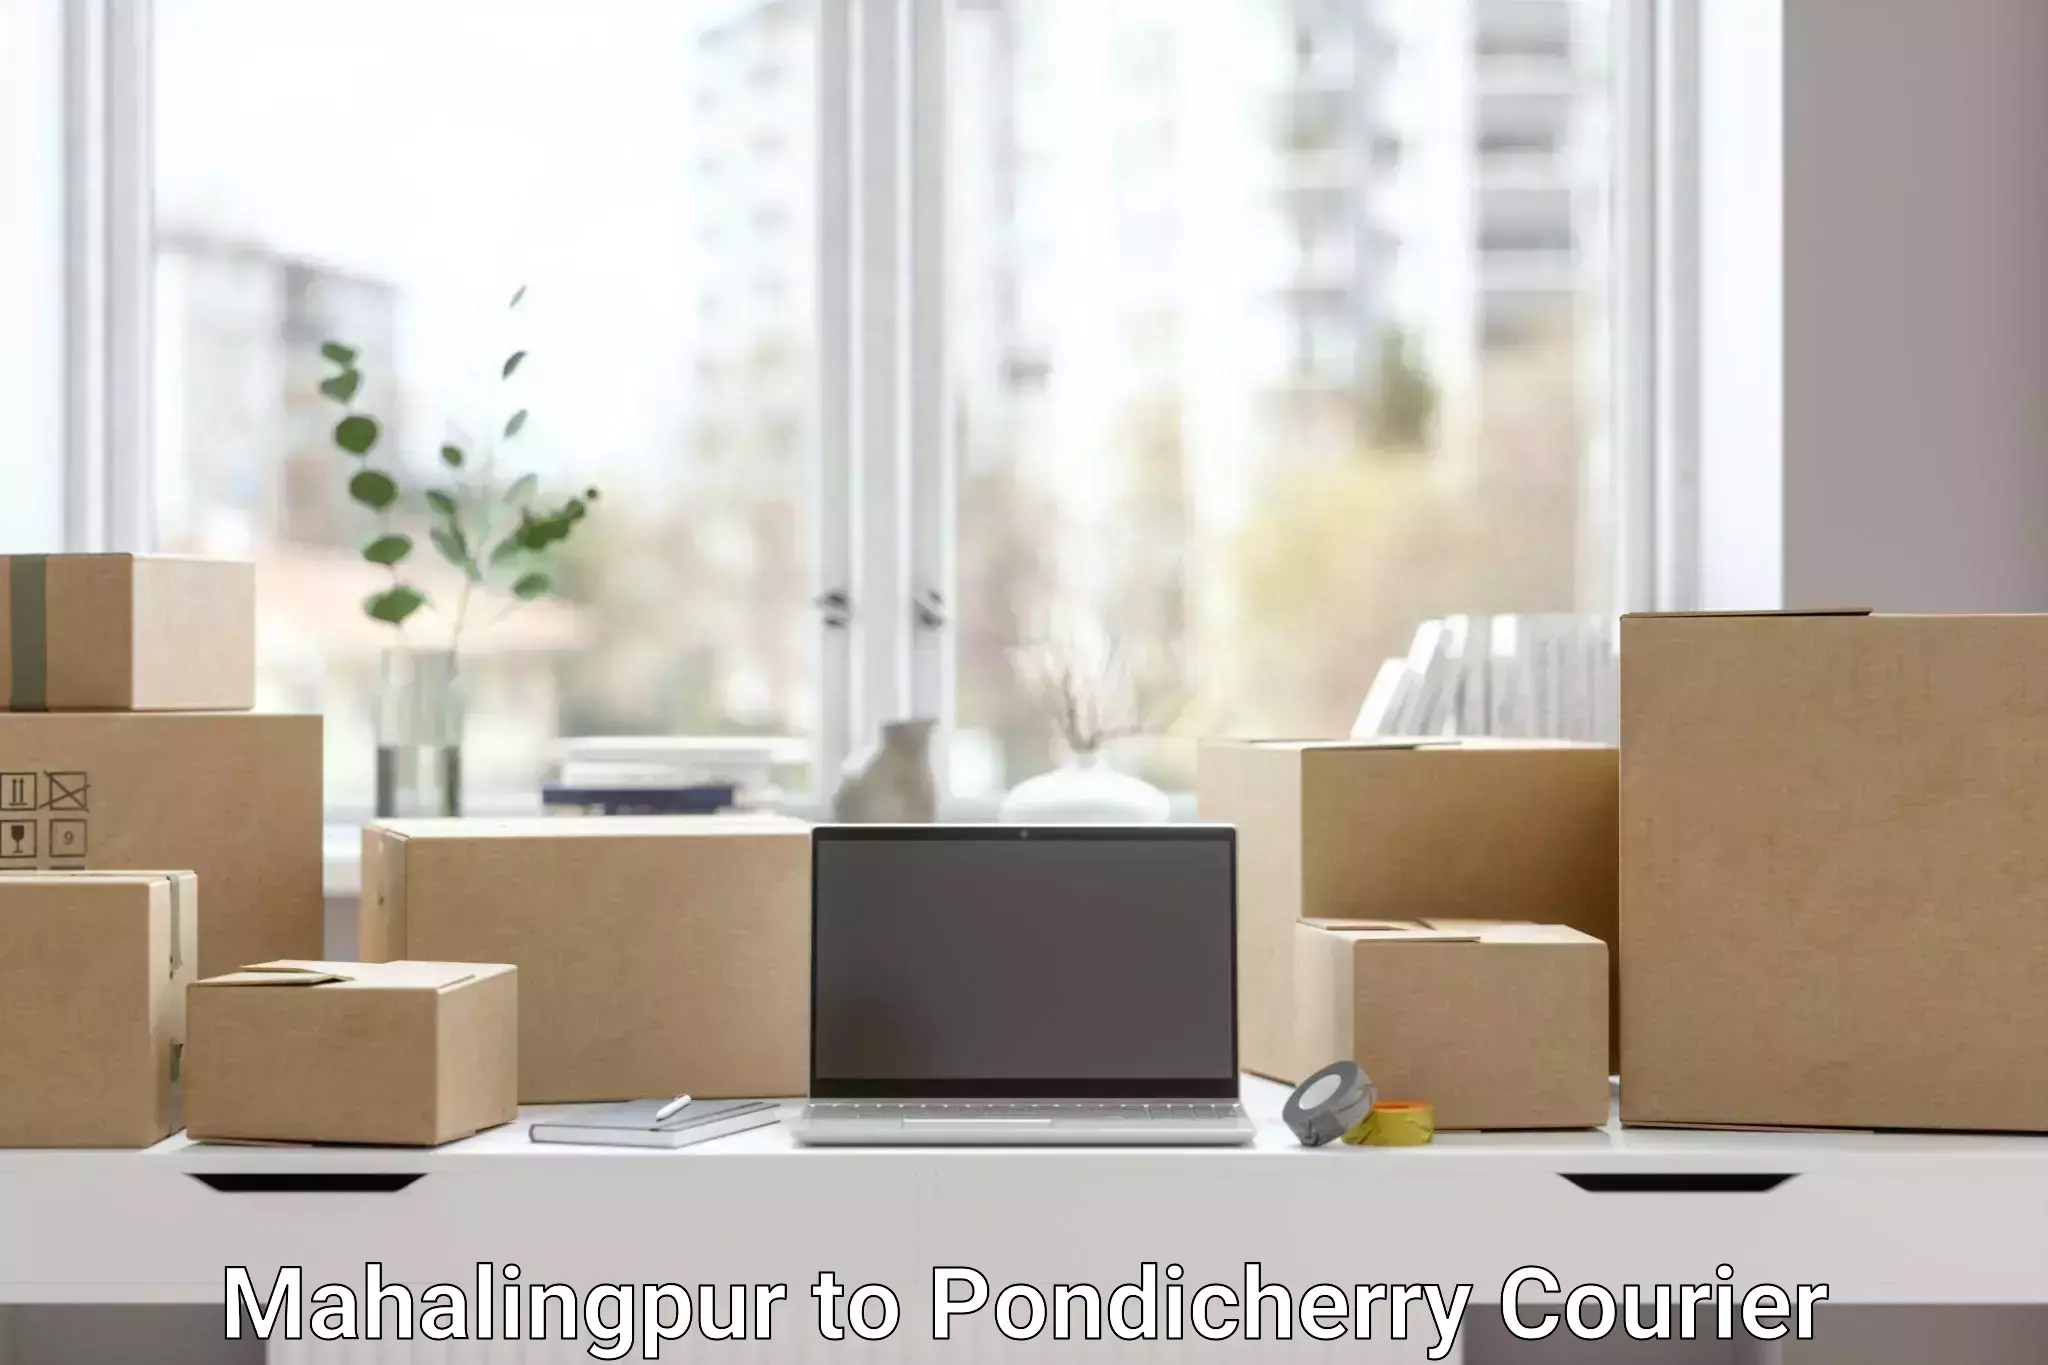 On-call courier service Mahalingpur to Pondicherry University